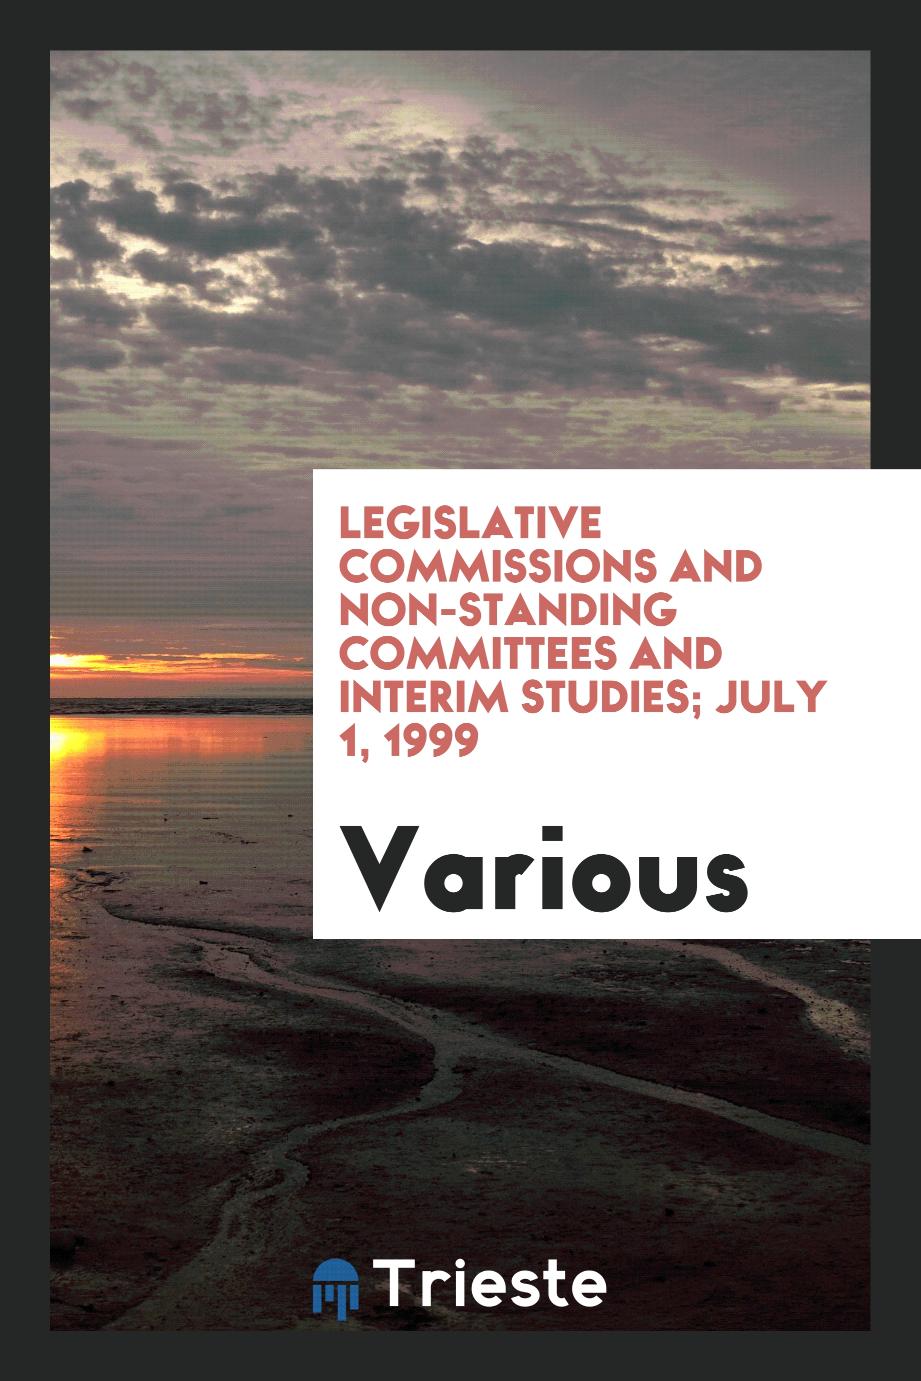 Legislative commissions and non-standing committees and interim studies; July 1, 1999